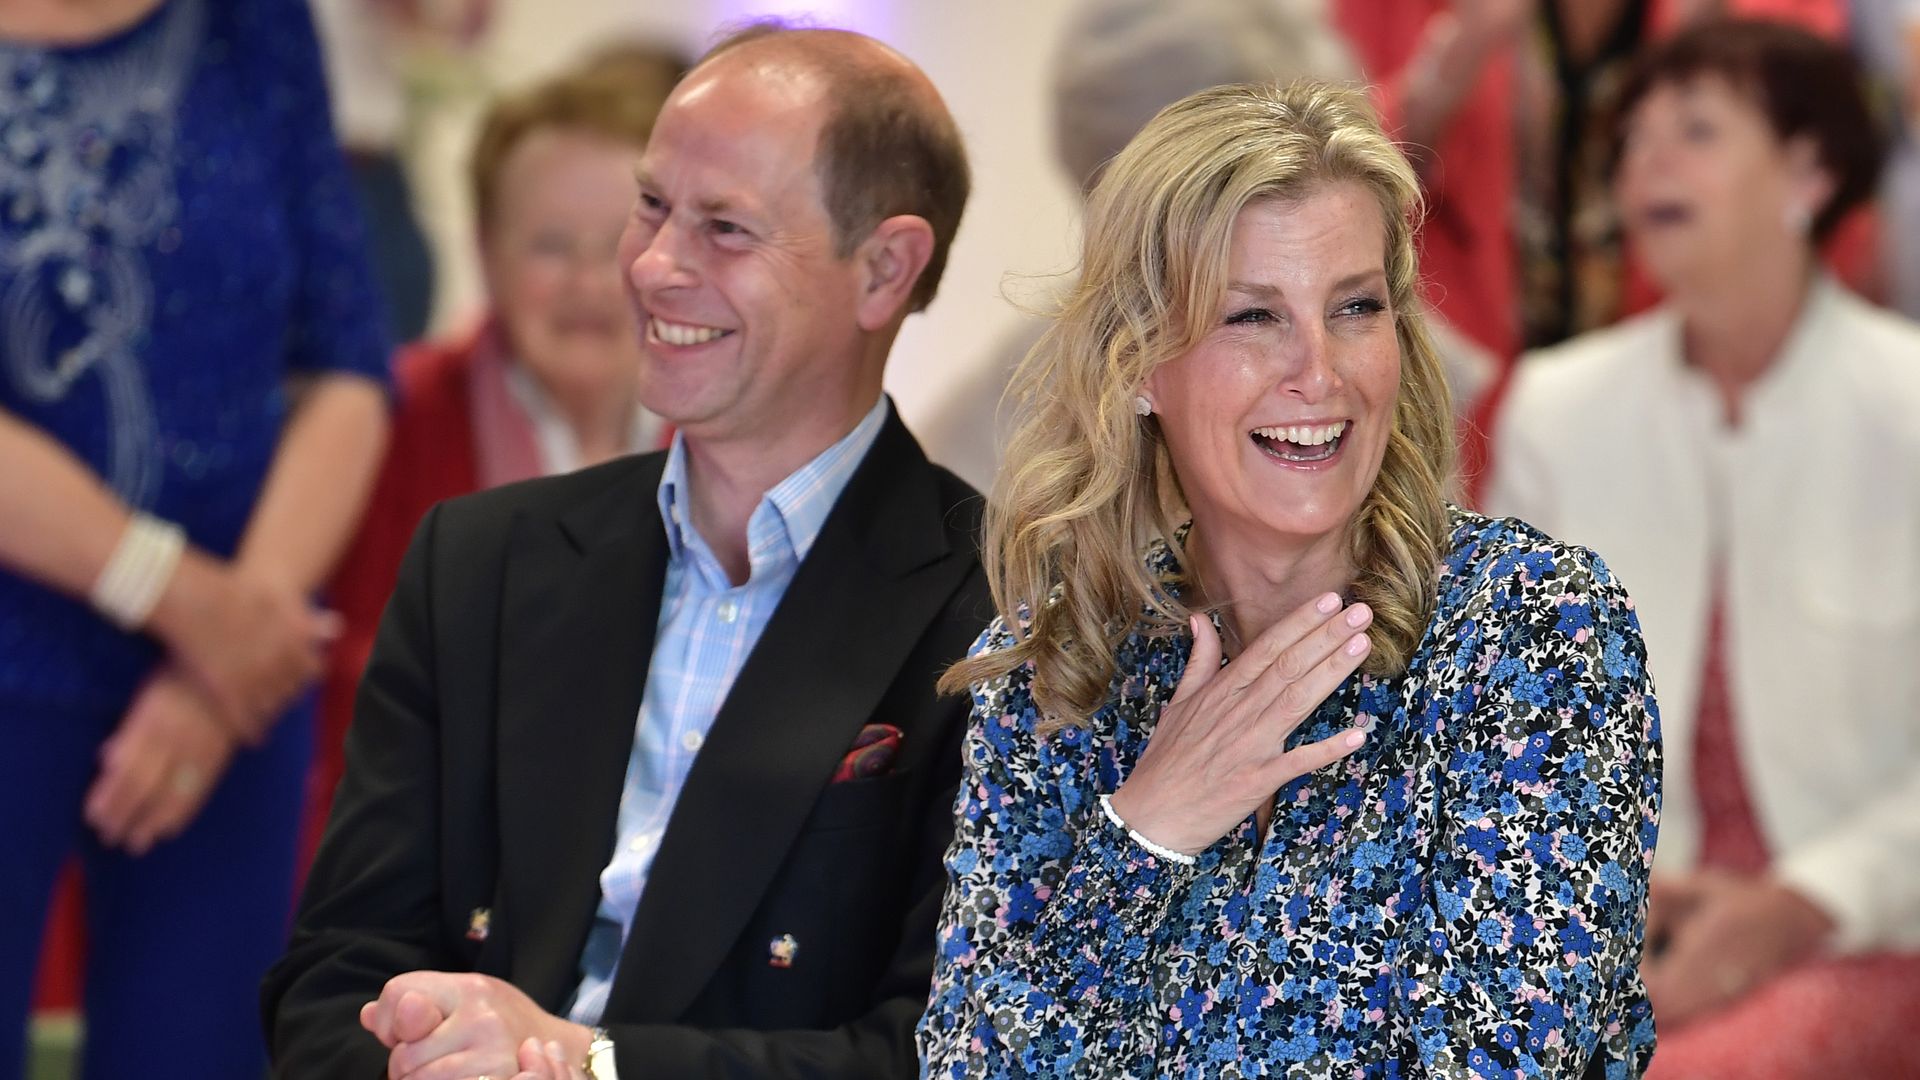 Prince Edward and Duchess Sophie laughing together